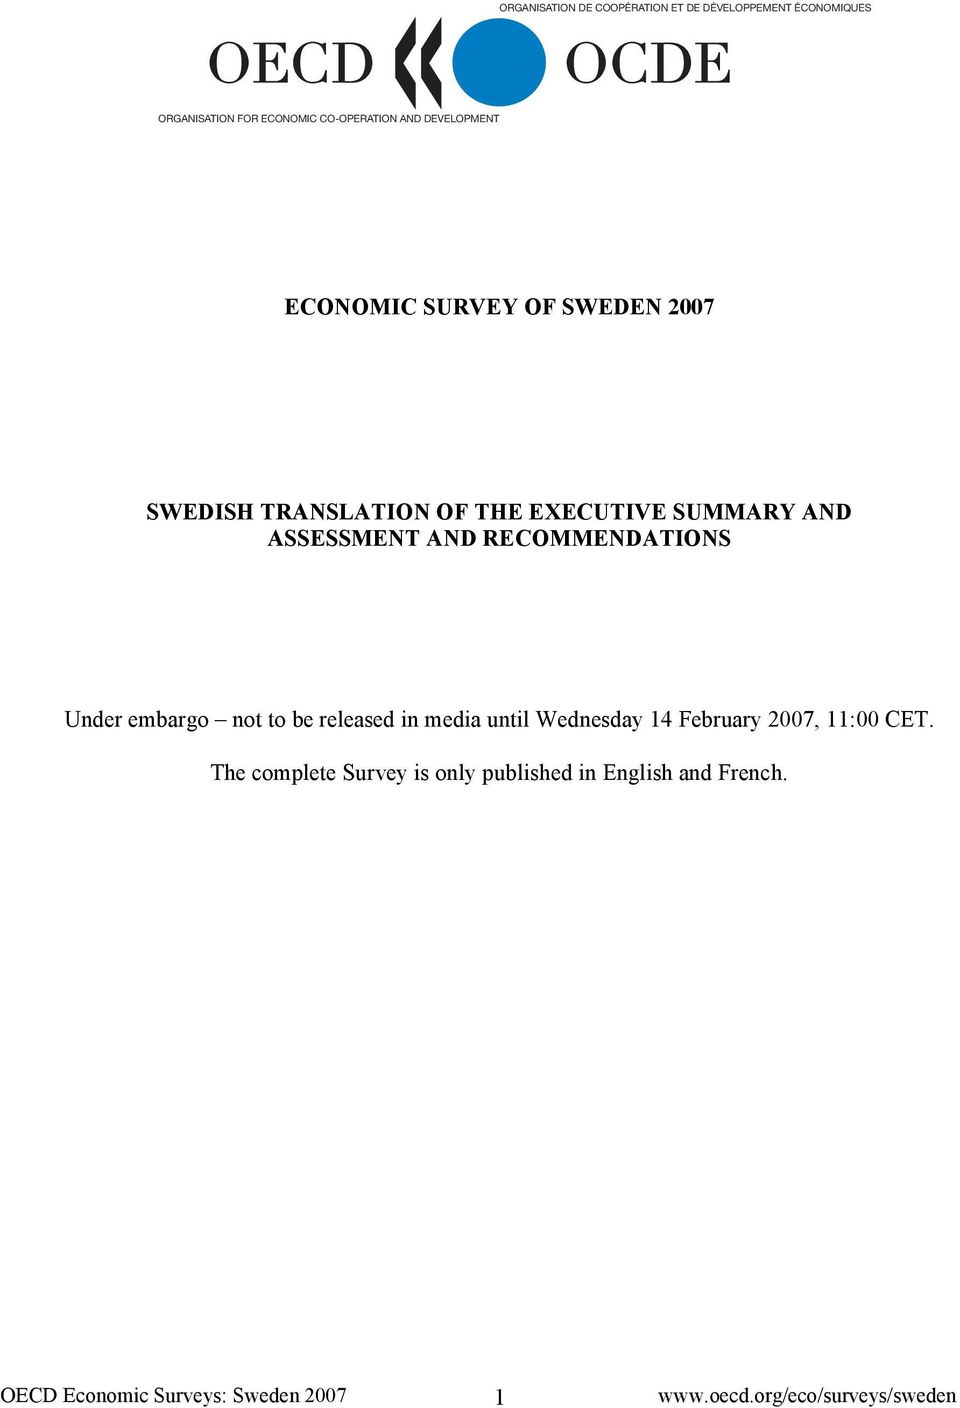 EXECUTIVE SUMMARY AND ASSESSMENT AND RECOMMENDATIONS Under embargo not to be released in